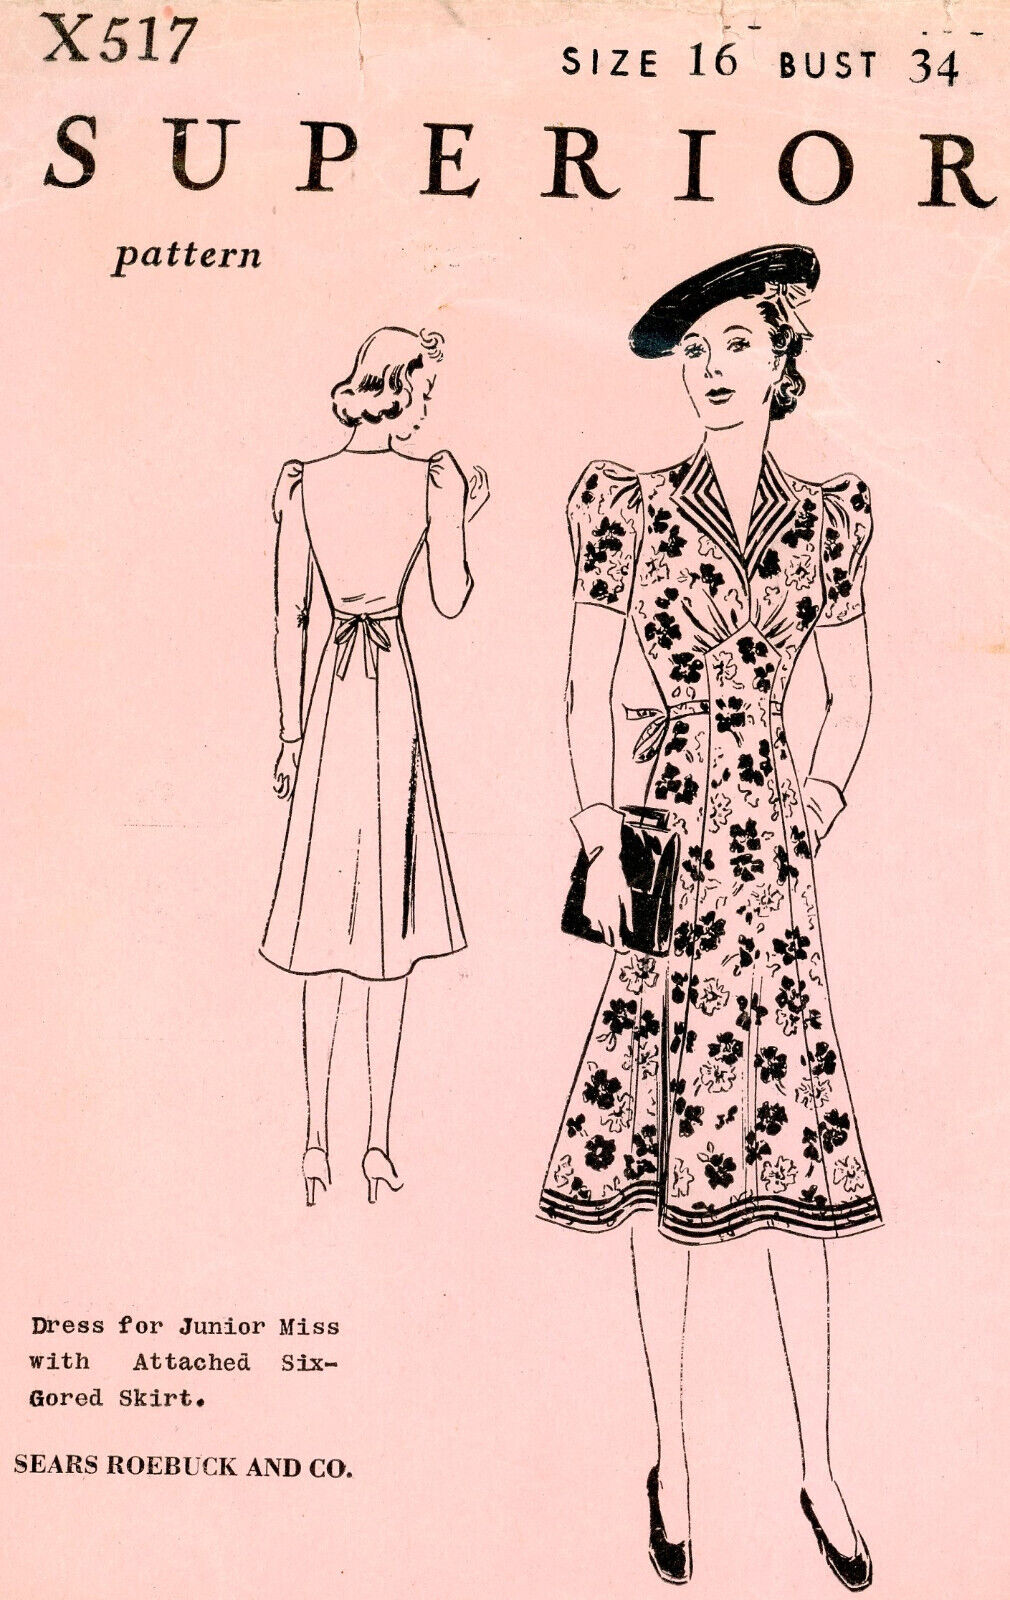 Vintage 1940s Superior Junior Miss Dress Sewing Pattern X517 Bust 34 Complete